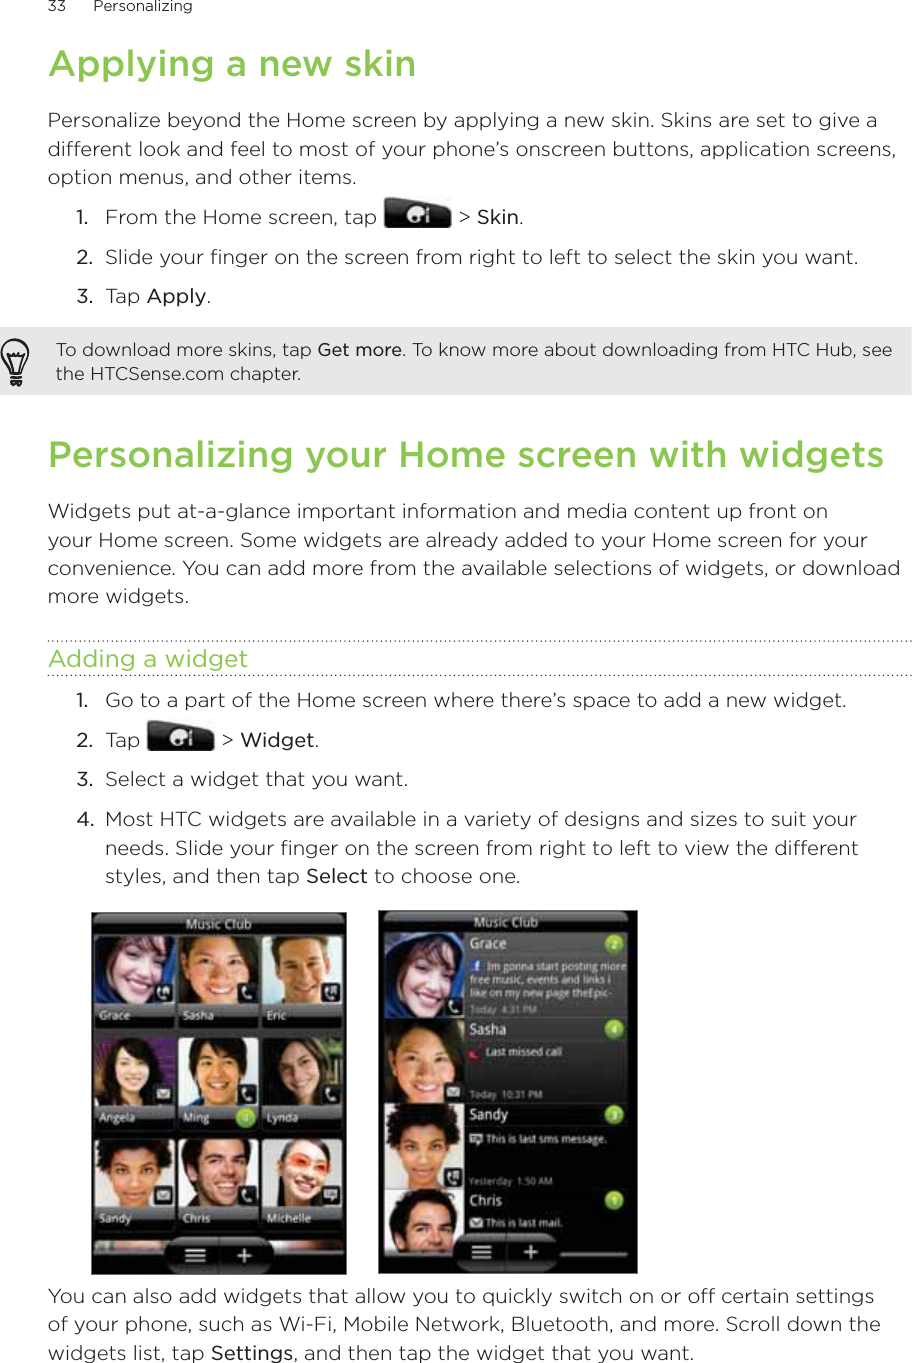 33      Personalizing      Applying a new skinPersonalize beyond the Home screen by applying a new skin. Skins are set to give a different look and feel to most of your phone’s onscreen buttons, application screens, option menus, and other items.From the Home screen, tap   &gt; Skin.Slide your finger on the screen from right to left to select the skin you want.3.  Tap Apply.To download more skins, tap Get more. To know more about downloading from HTC Hub, see the HTCSense.com chapter.Personalizing your Home screen with widgetsWidgets put at-a-glance important information and media content up front on your Home screen. Some widgets are already added to your Home screen for your convenience. You can add more from the available selections of widgets, or download more widgets.Adding a widgetGo to a part of the Home screen where there’s space to add a new widget.Tap   &gt; Widget.Select a widget that you want.Most HTC widgets are available in a variety of designs and sizes to suit your needs. Slide your finger on the screen from right to left to view the different styles, and then tap Select to choose one.You can also add widgets that allow you to quickly switch on or off certain settings of your phone, such as Wi-Fi, Mobile Network, Bluetooth, and more. Scroll down the widgets list, tap Settings, and then tap the widget that you want.1.2.1.2.3.4.